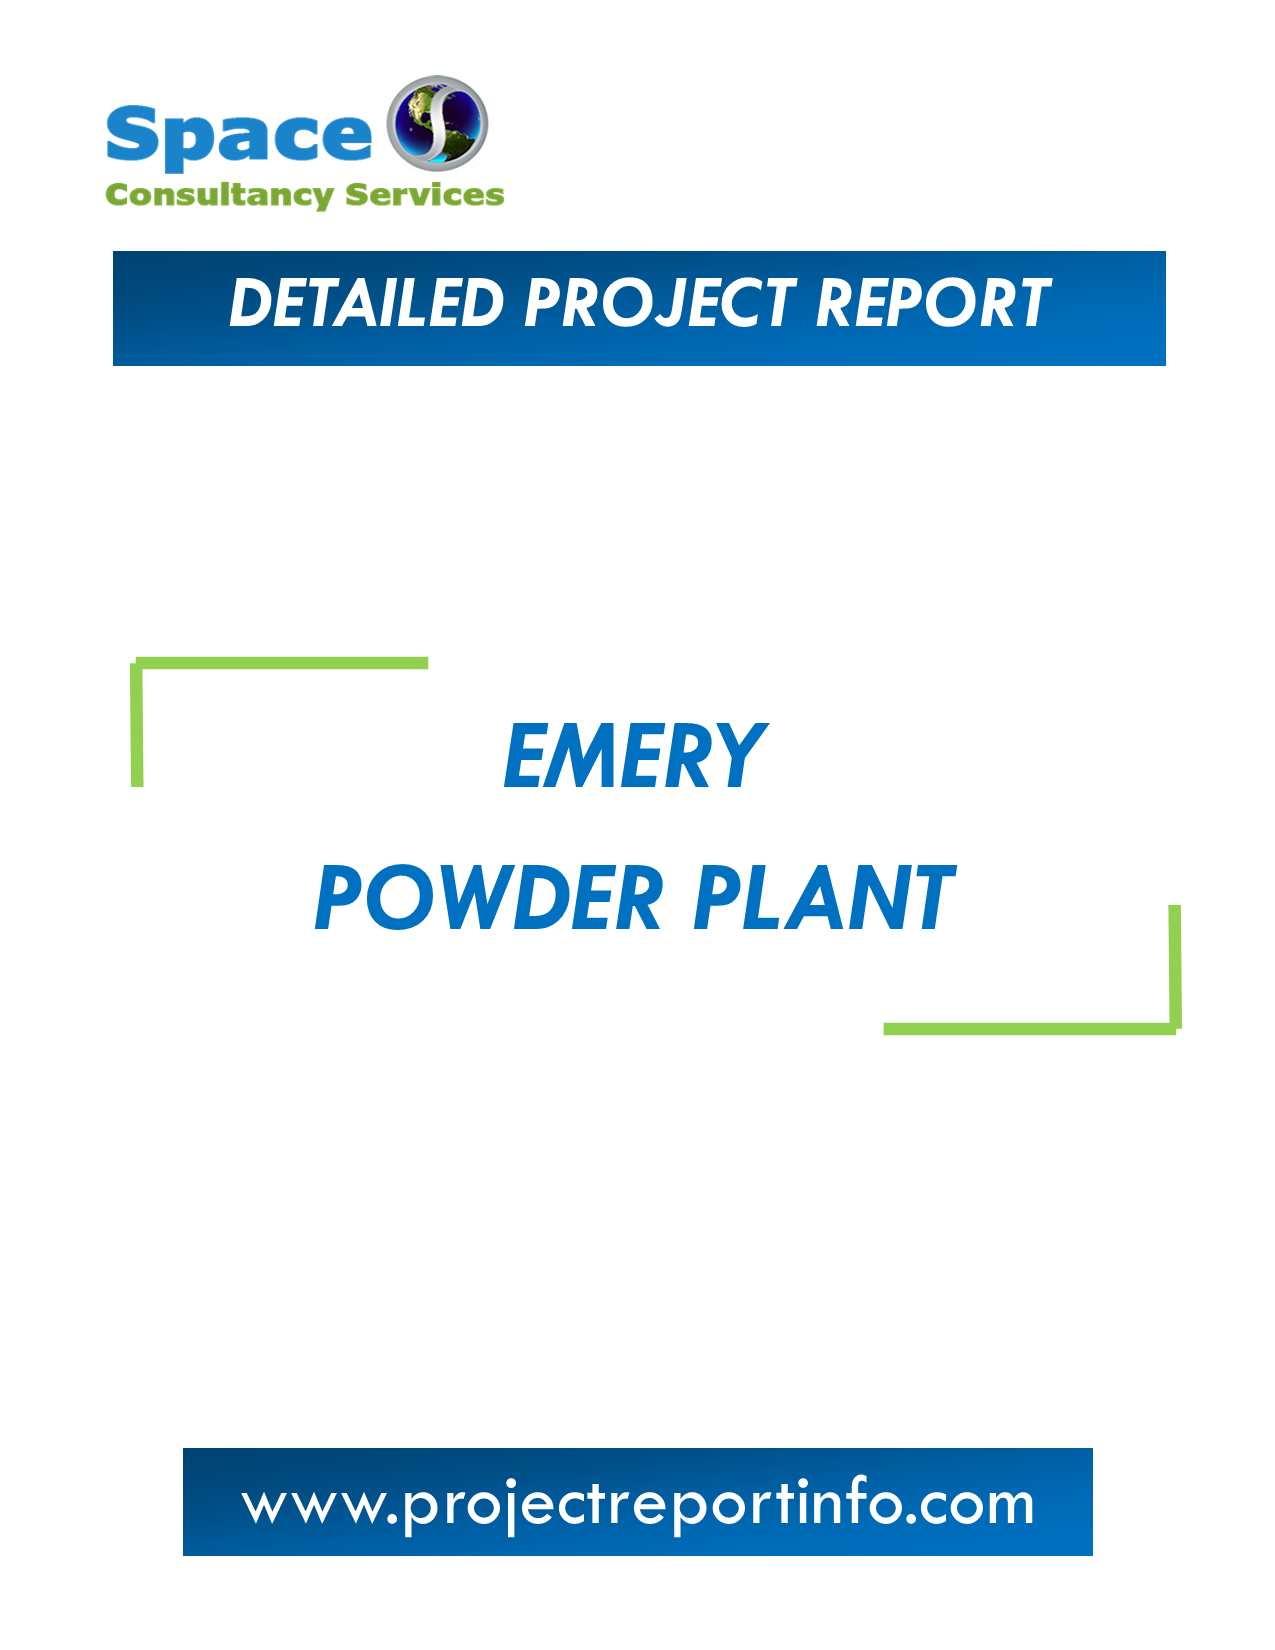 Project Report on Emery Powder Plant